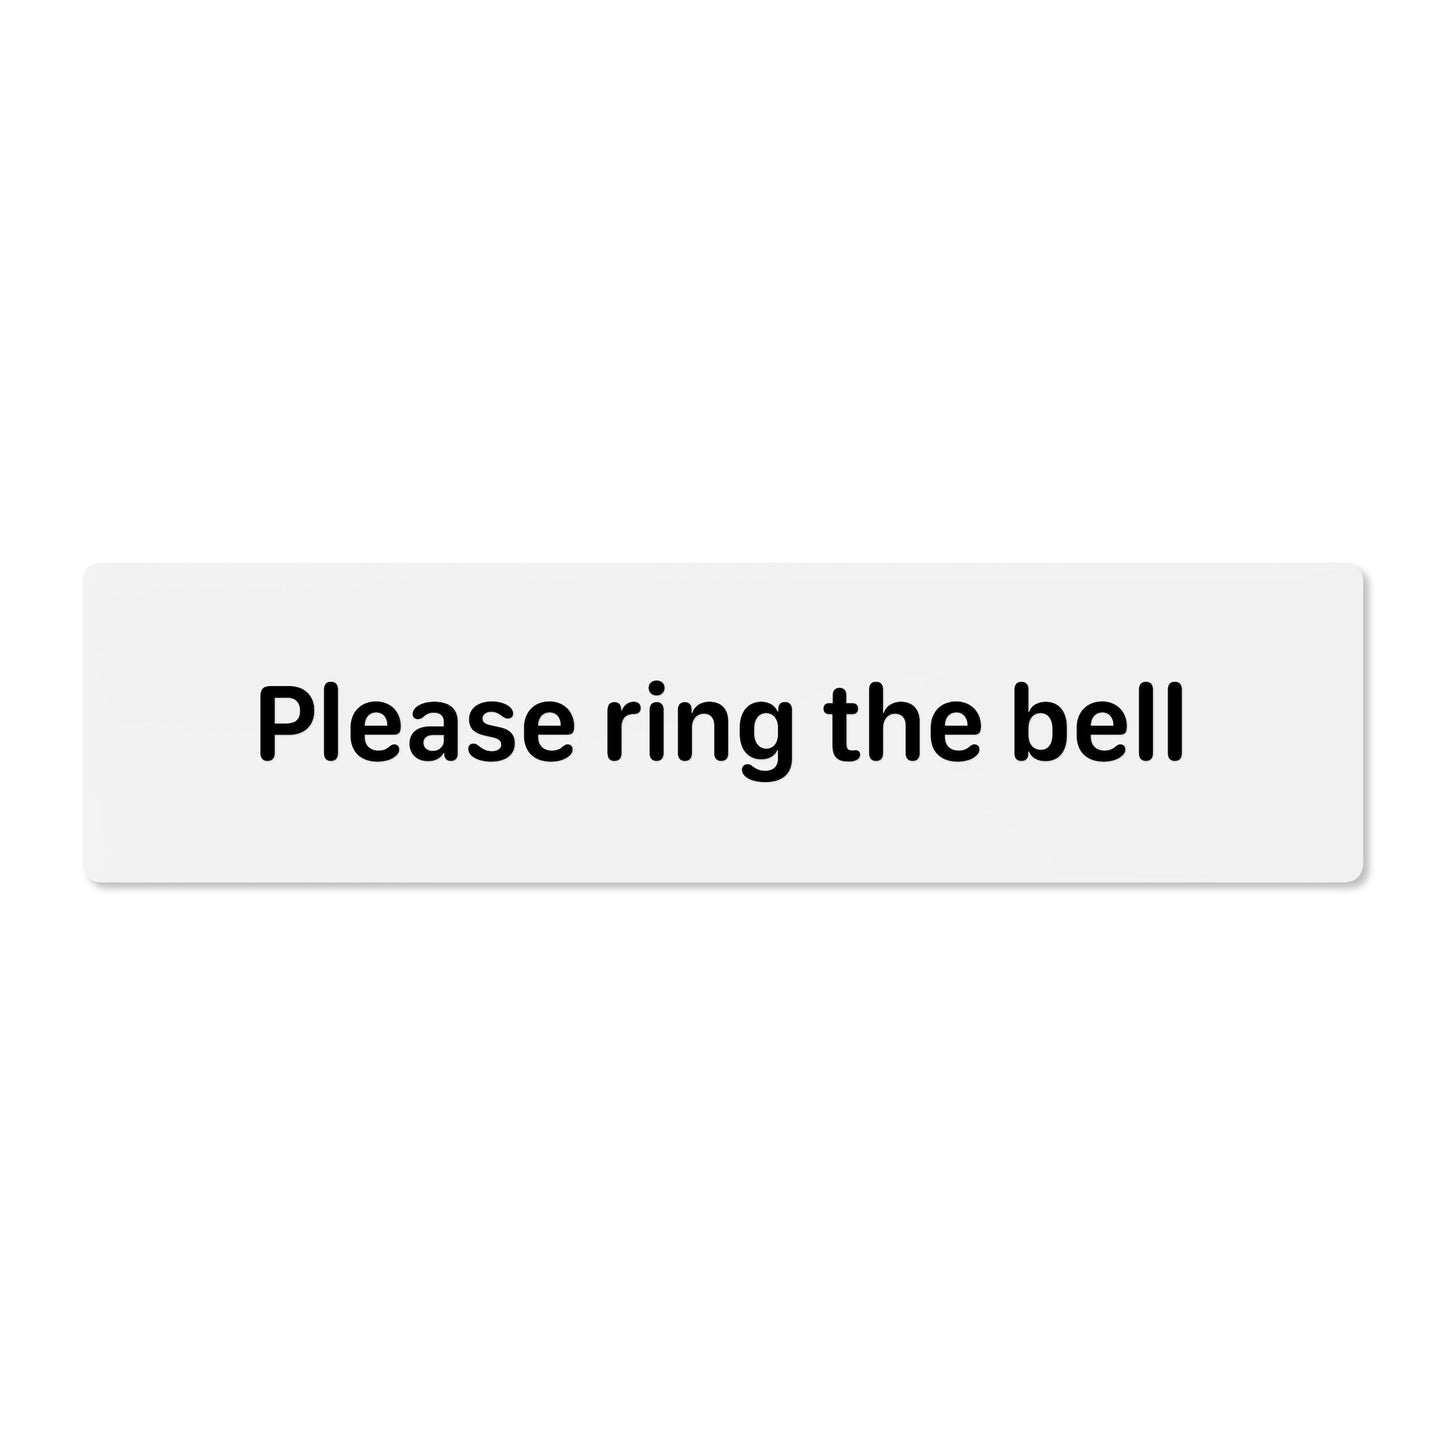 Please ring the bell